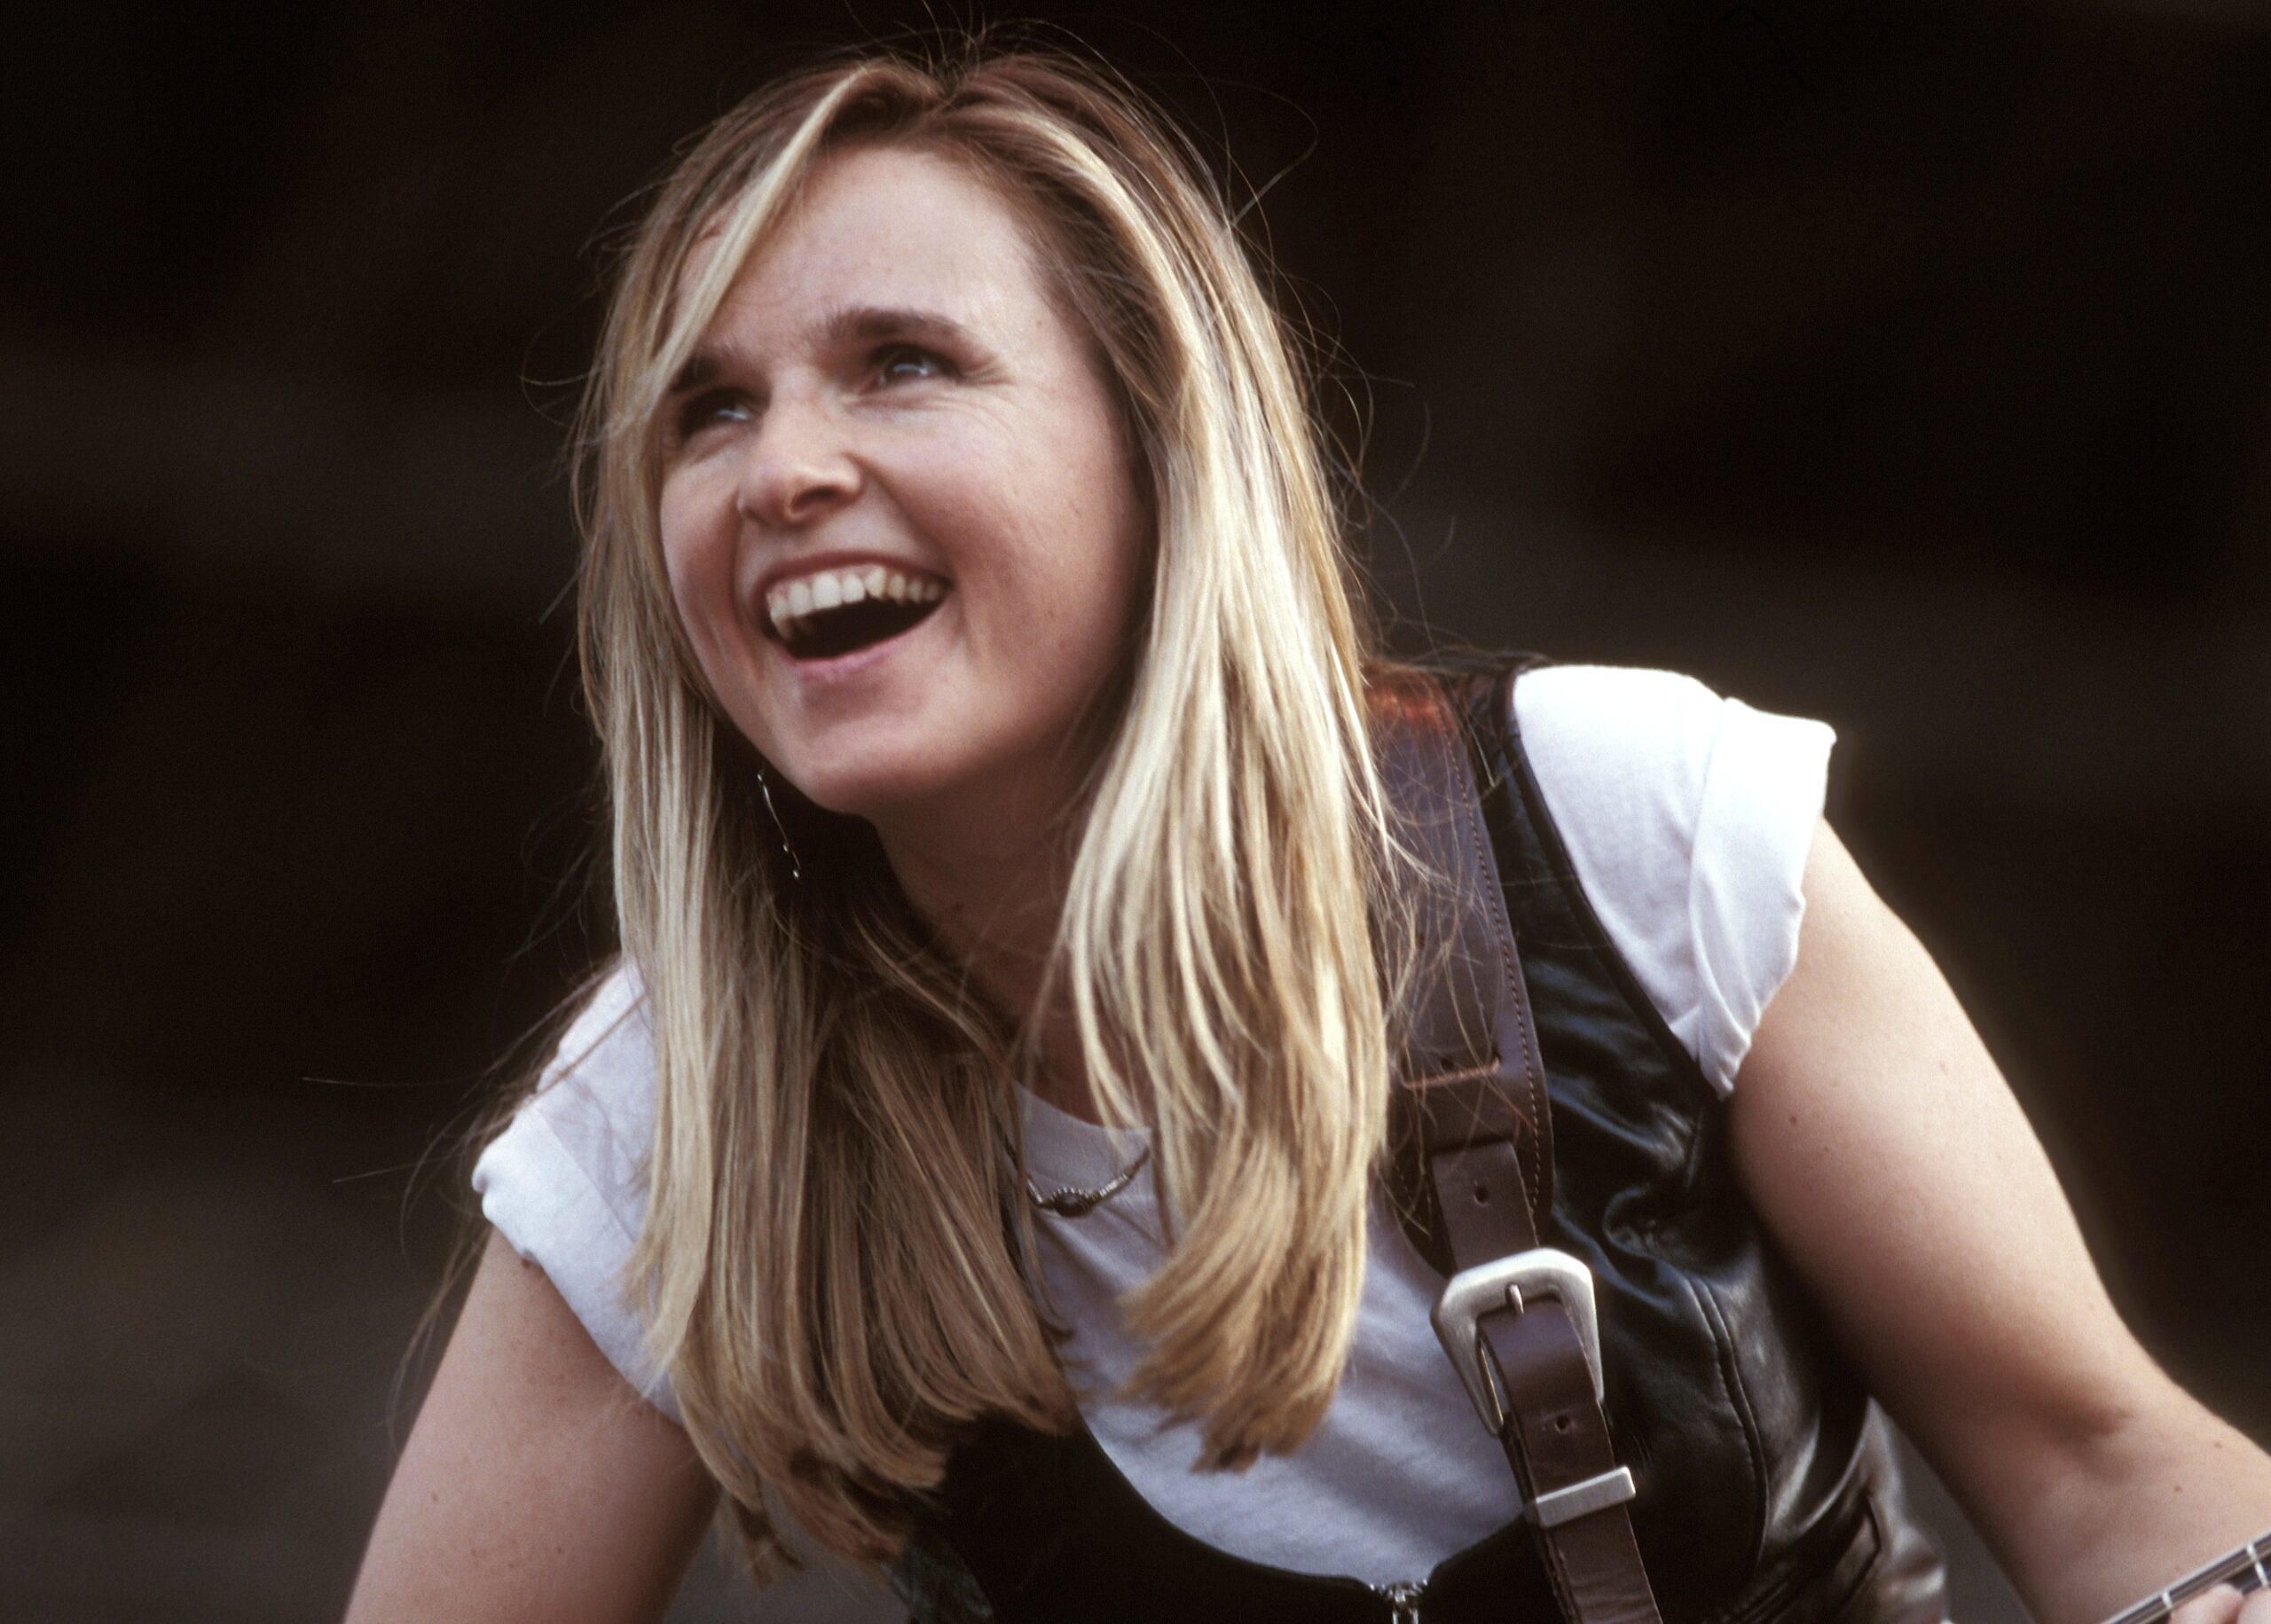 'As long as you don't flag wave.' Melissa Etheridge performing in 1989, four years before she came out publicly. (Credit: John Atashian via Getty Images)